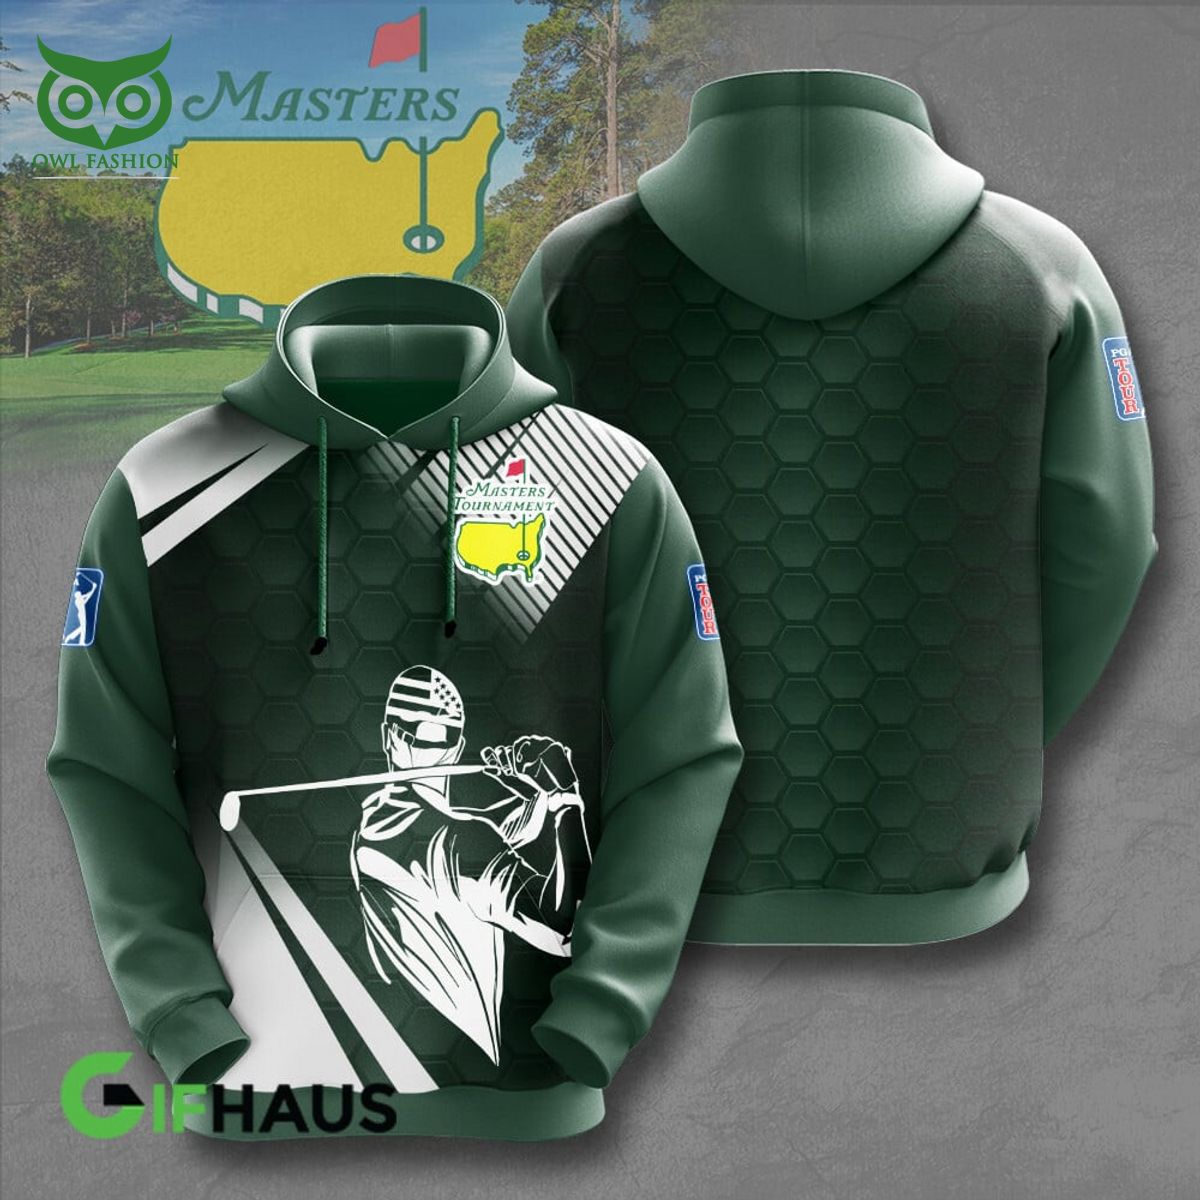 ping golf master tournament 3d polo hoodie longsleeves 1 AW4rA